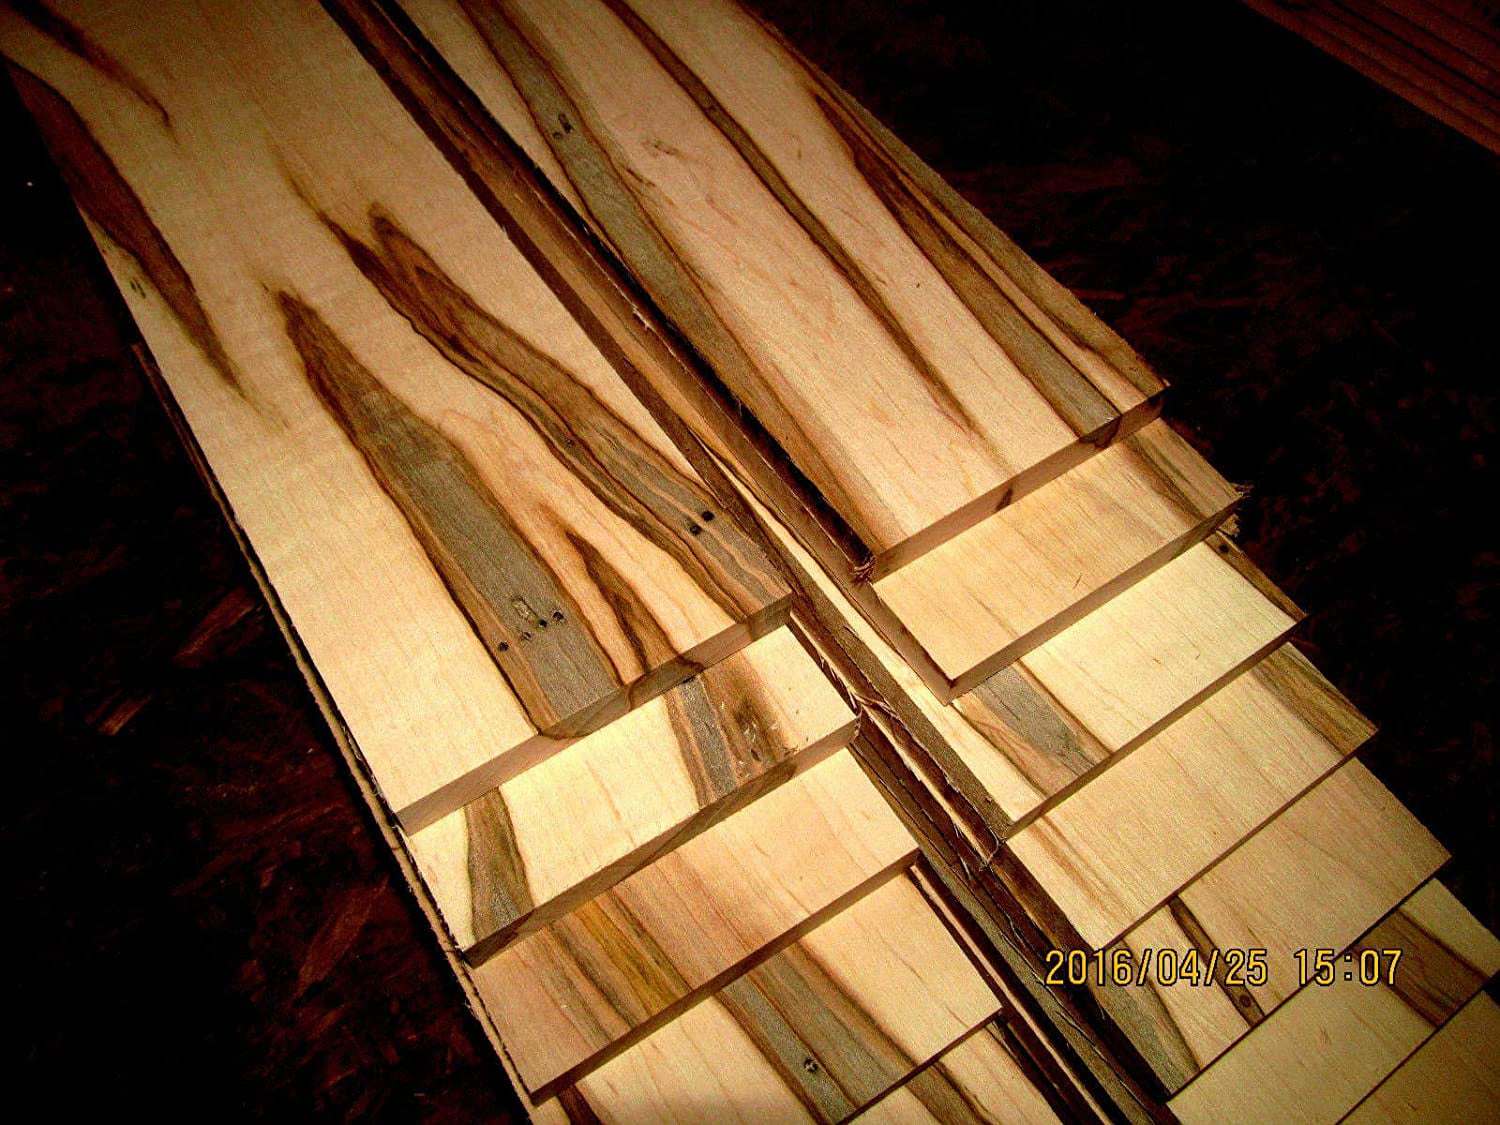 boards lumber 3/8 surface 4 sides 48" Ambrosia Maple 